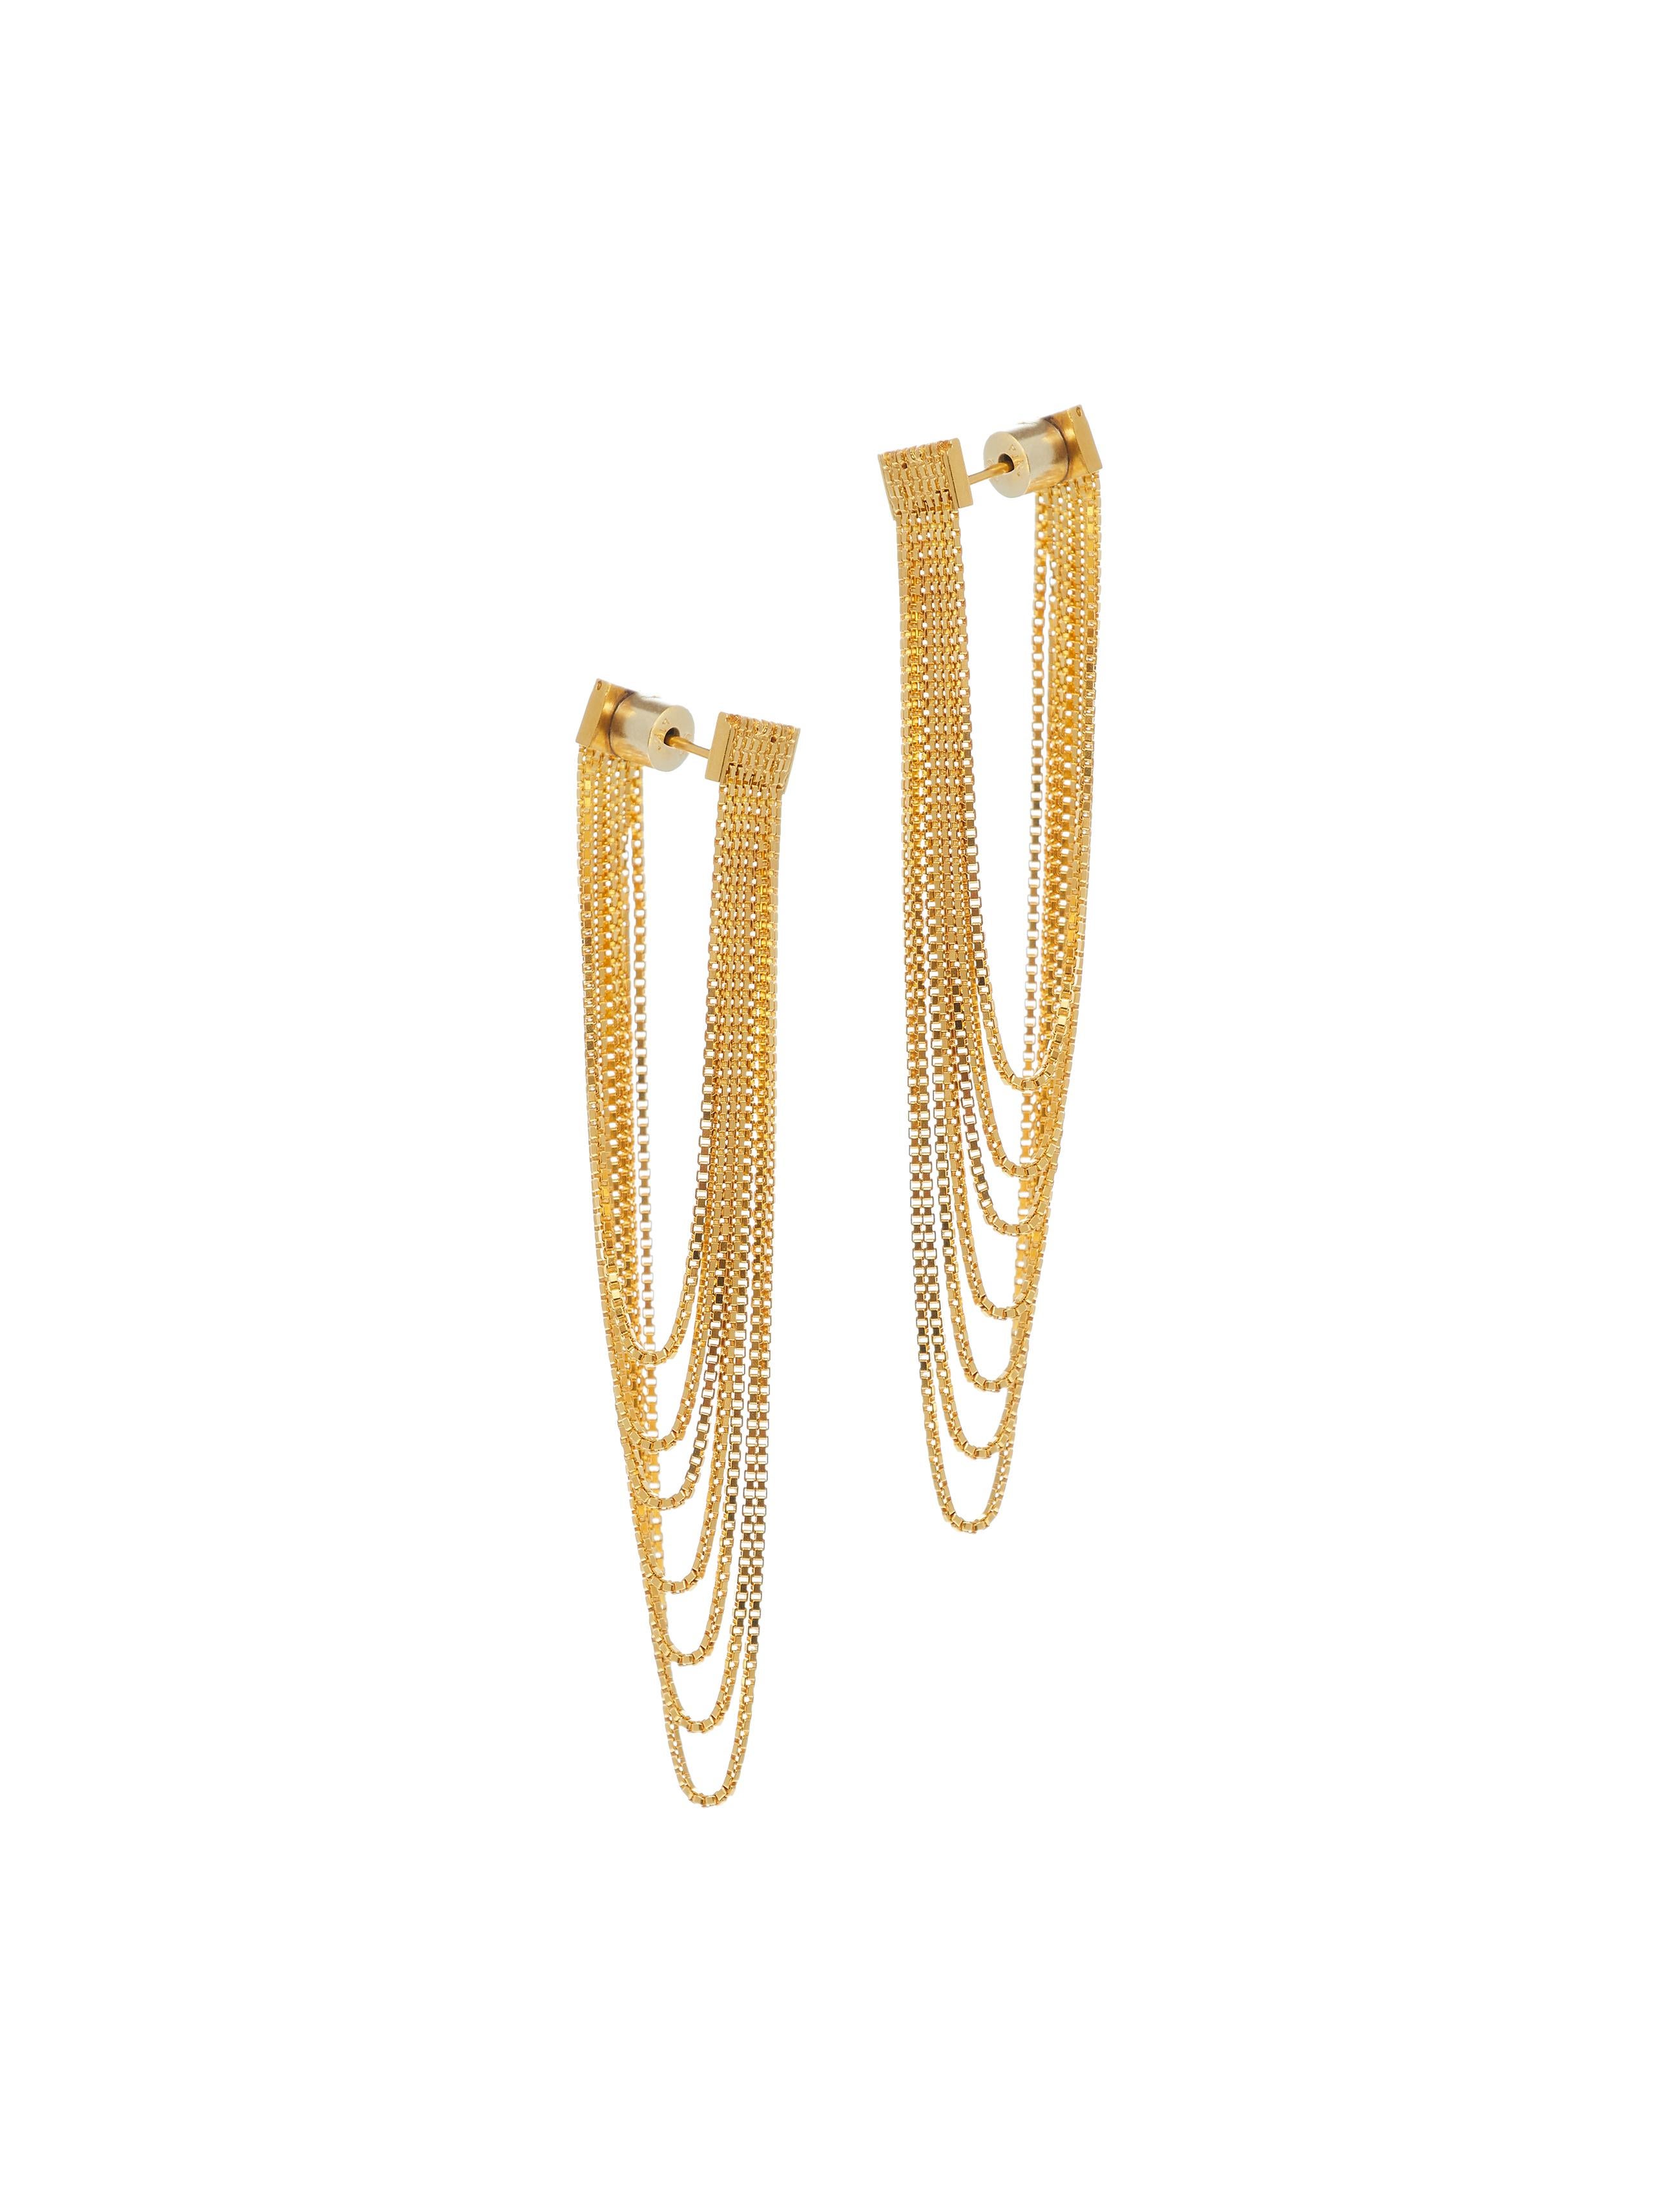 Silver 18k Gold Plated Earrings Box Chain Long Movement Handmade Greek Jewelry For Sale 5